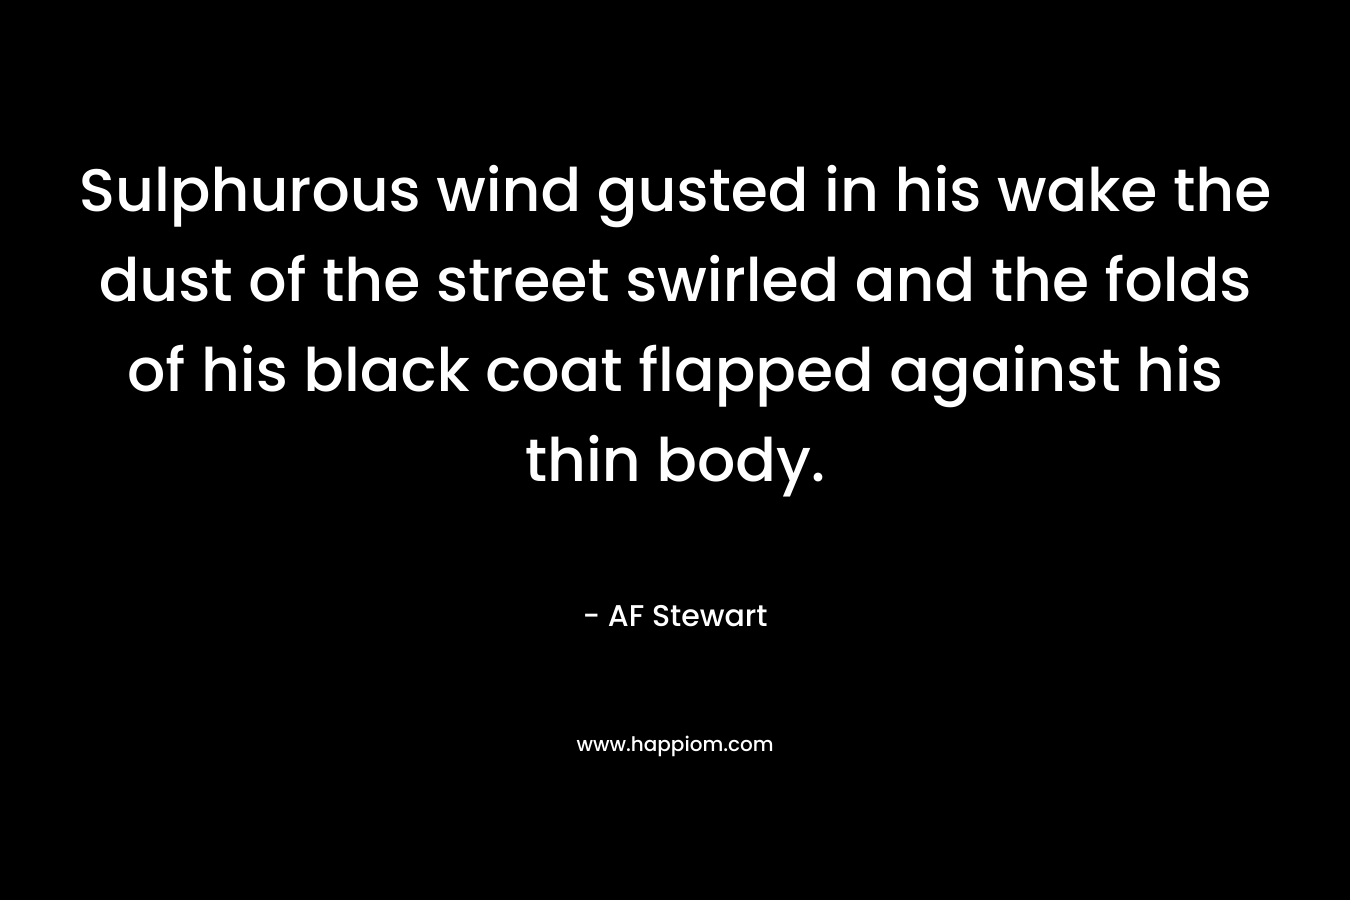 Sulphurous wind gusted in his wake the dust of the street swirled and the folds of his black coat flapped against his thin body. 